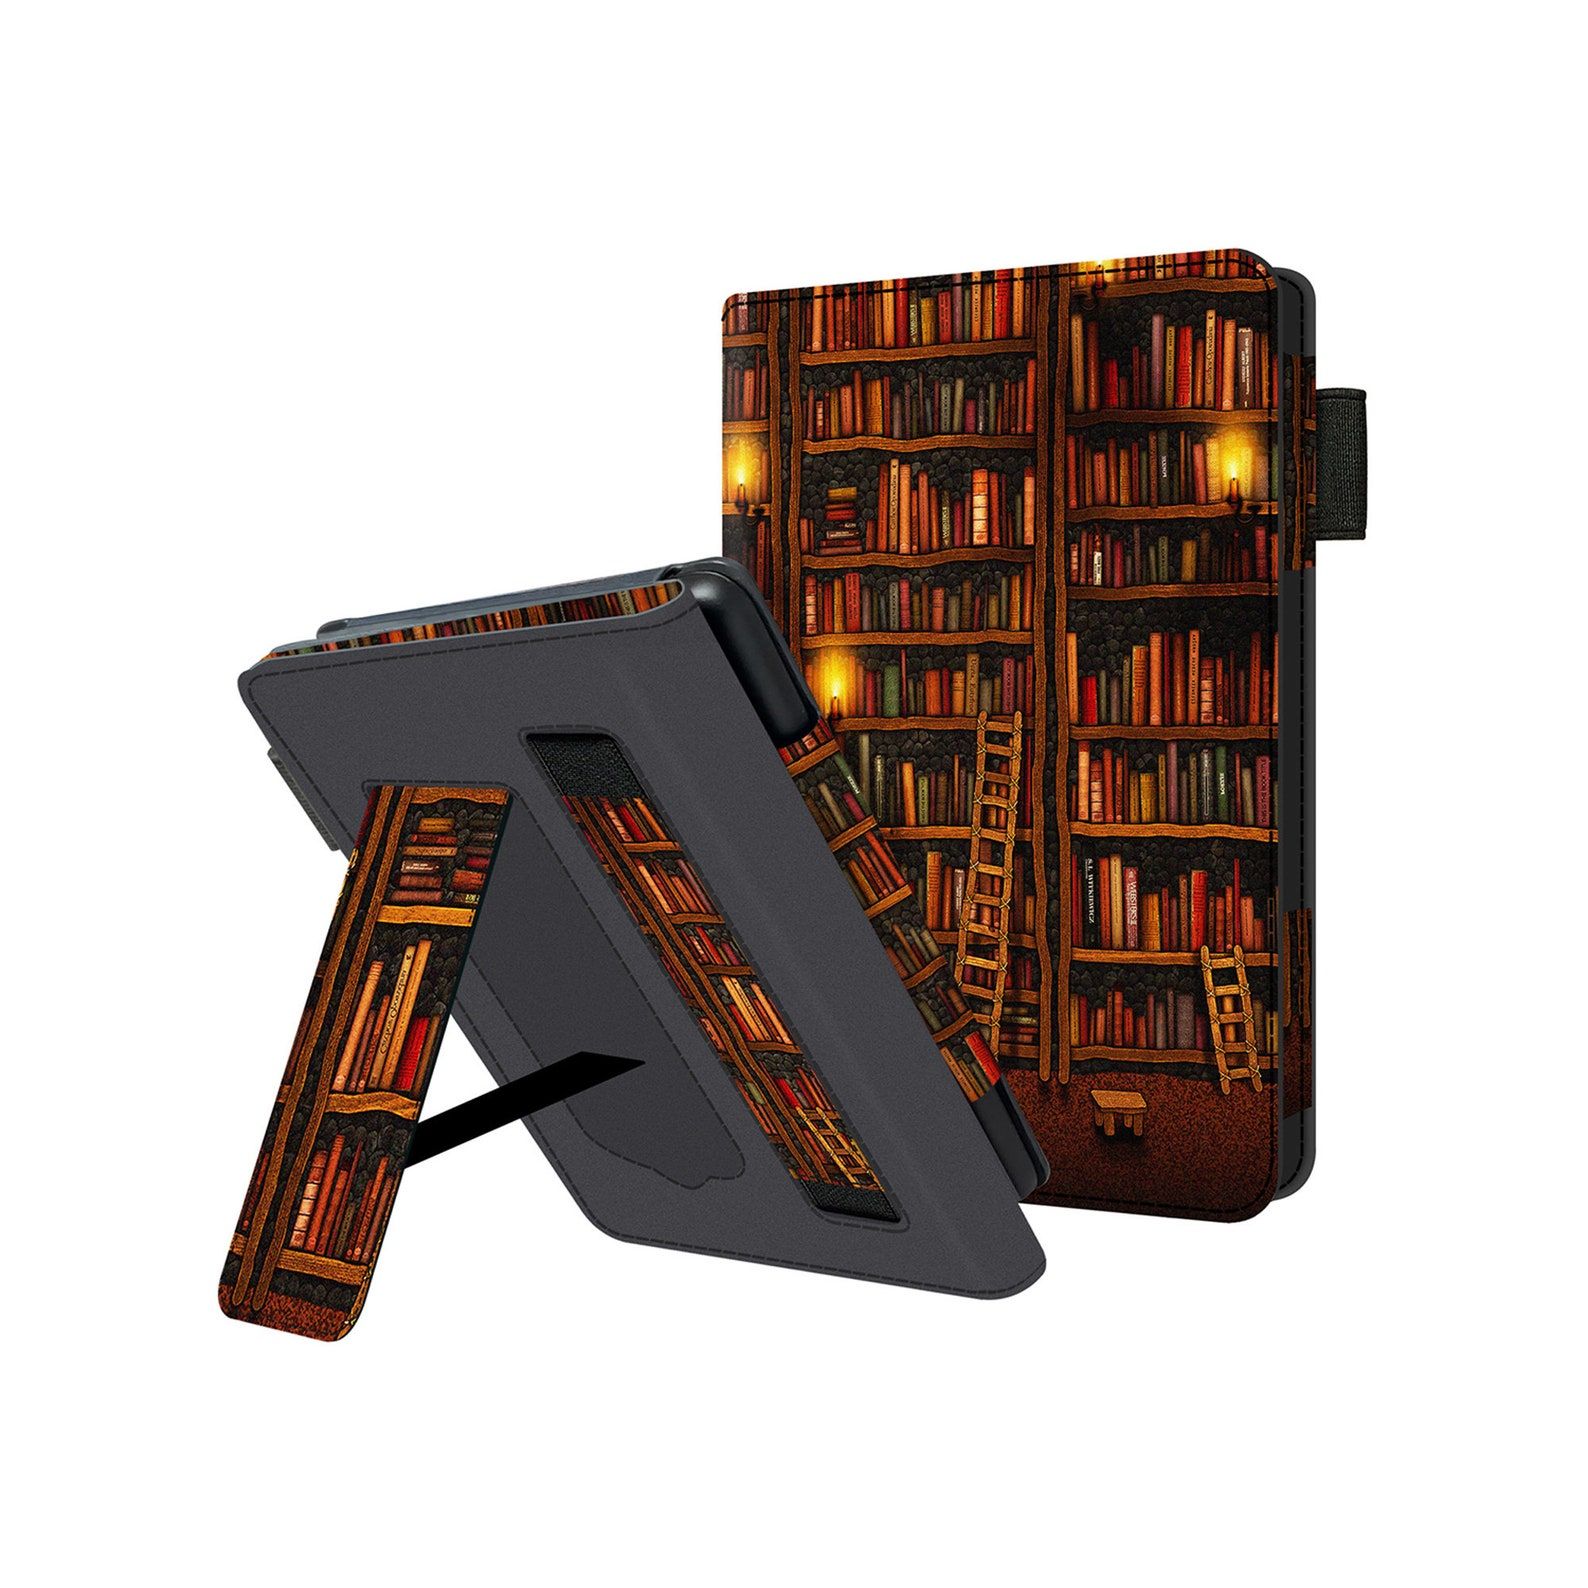 Handheld Library Kindle case